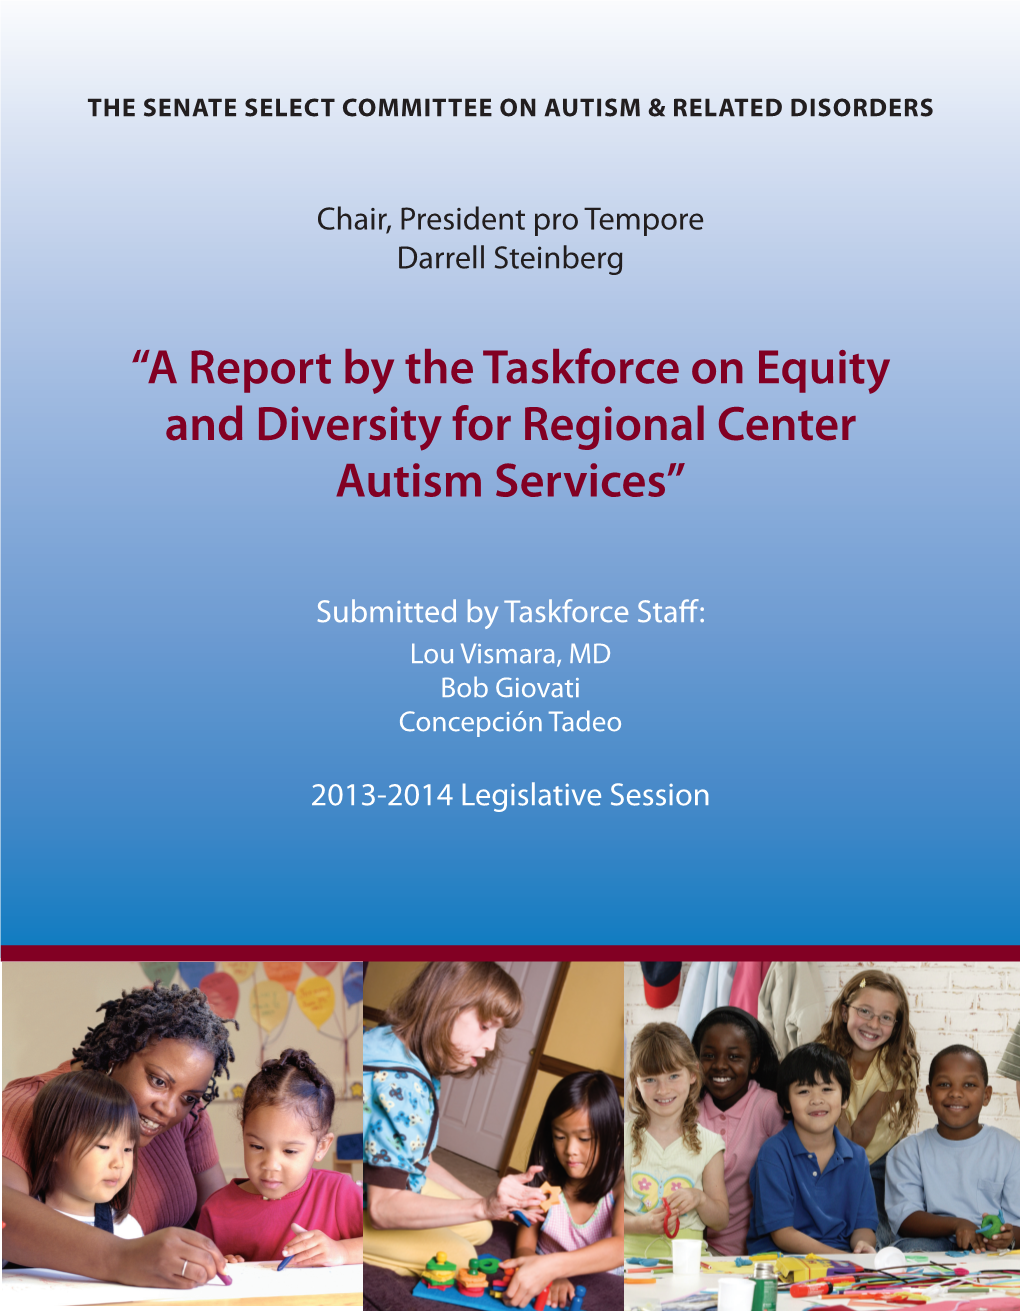 “A Report by the Taskforce on Equity and Diversity for Regional Center Autism Services”